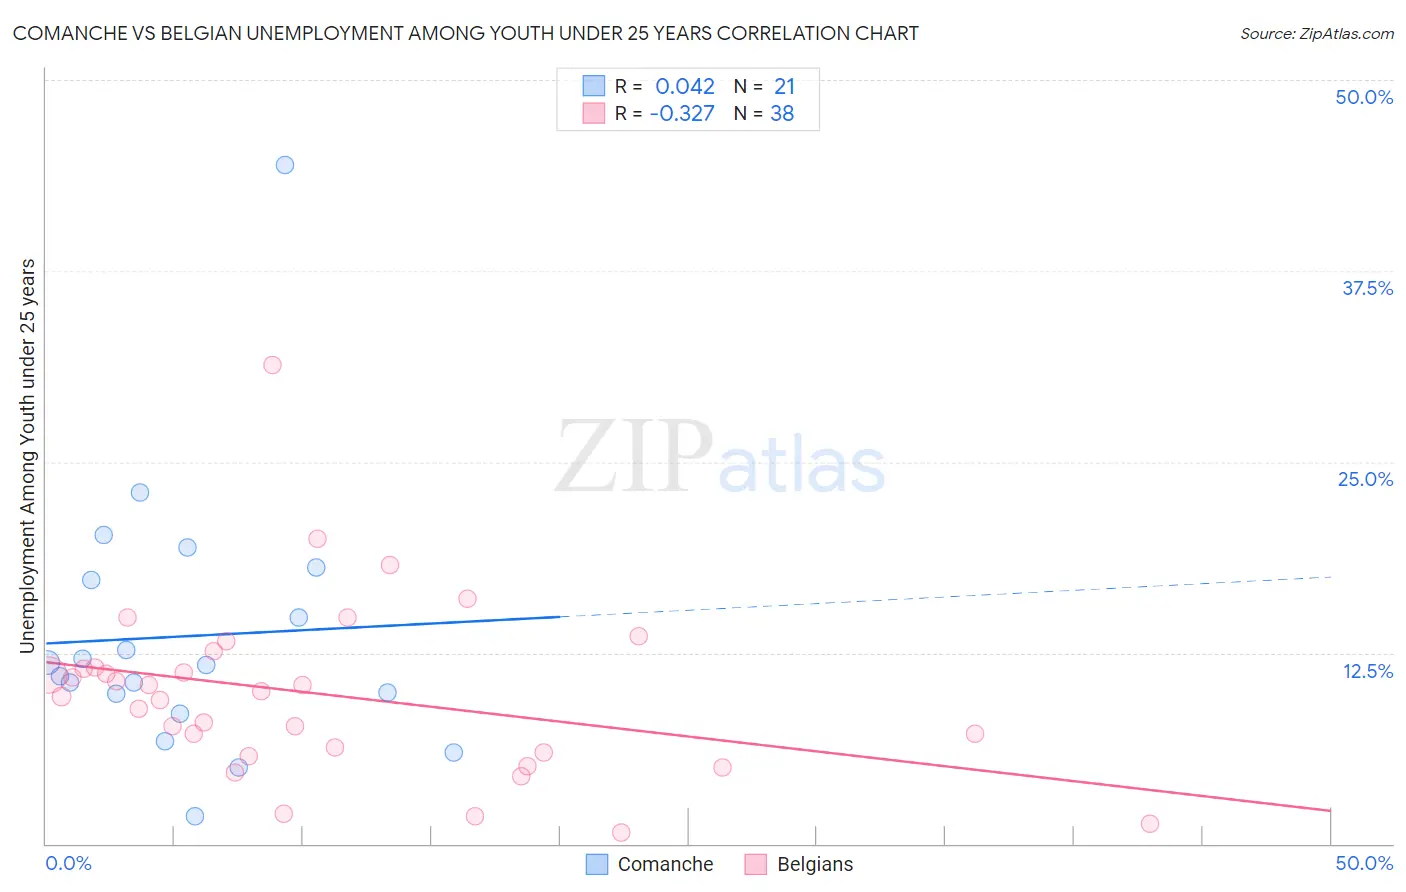 Comanche vs Belgian Unemployment Among Youth under 25 years